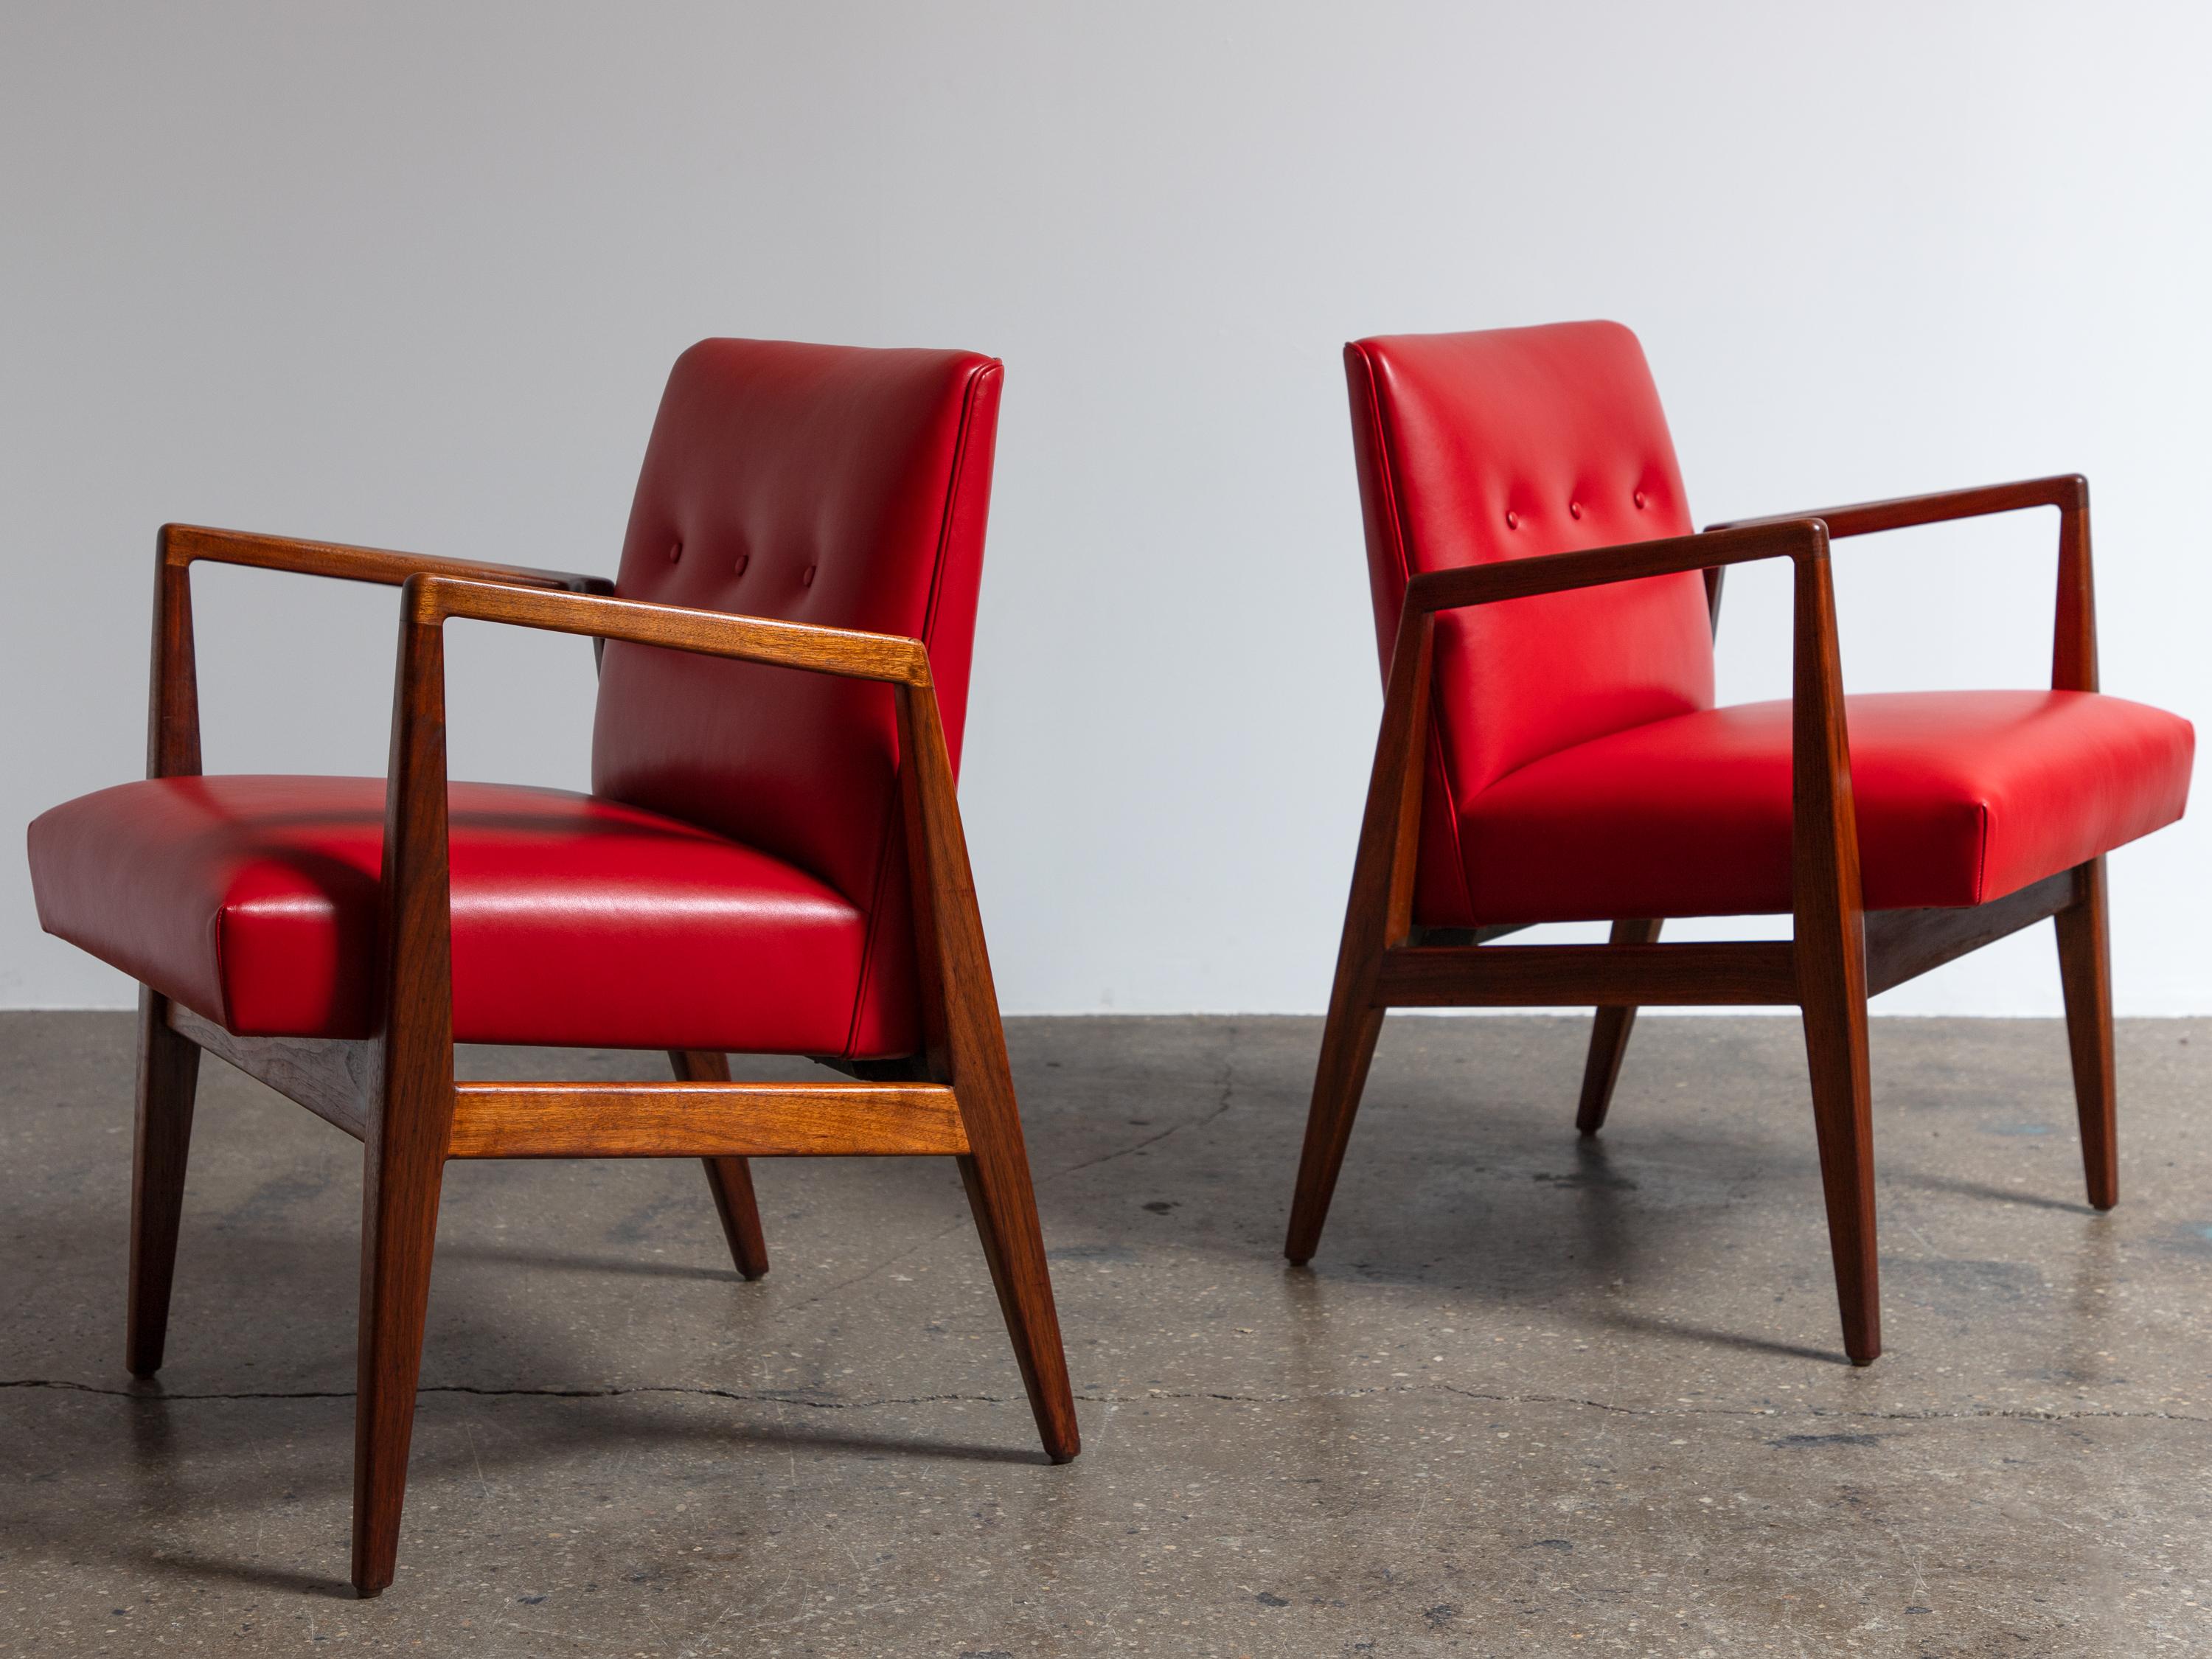 Pair of poised and elegant model 1103 armchairs, designed by Jens Risom for his eponymous company Jens Risom Design Inc.  Showcasing the designer’s fusion of Scandinavian and American design, the chair features angular walnut wood frames with